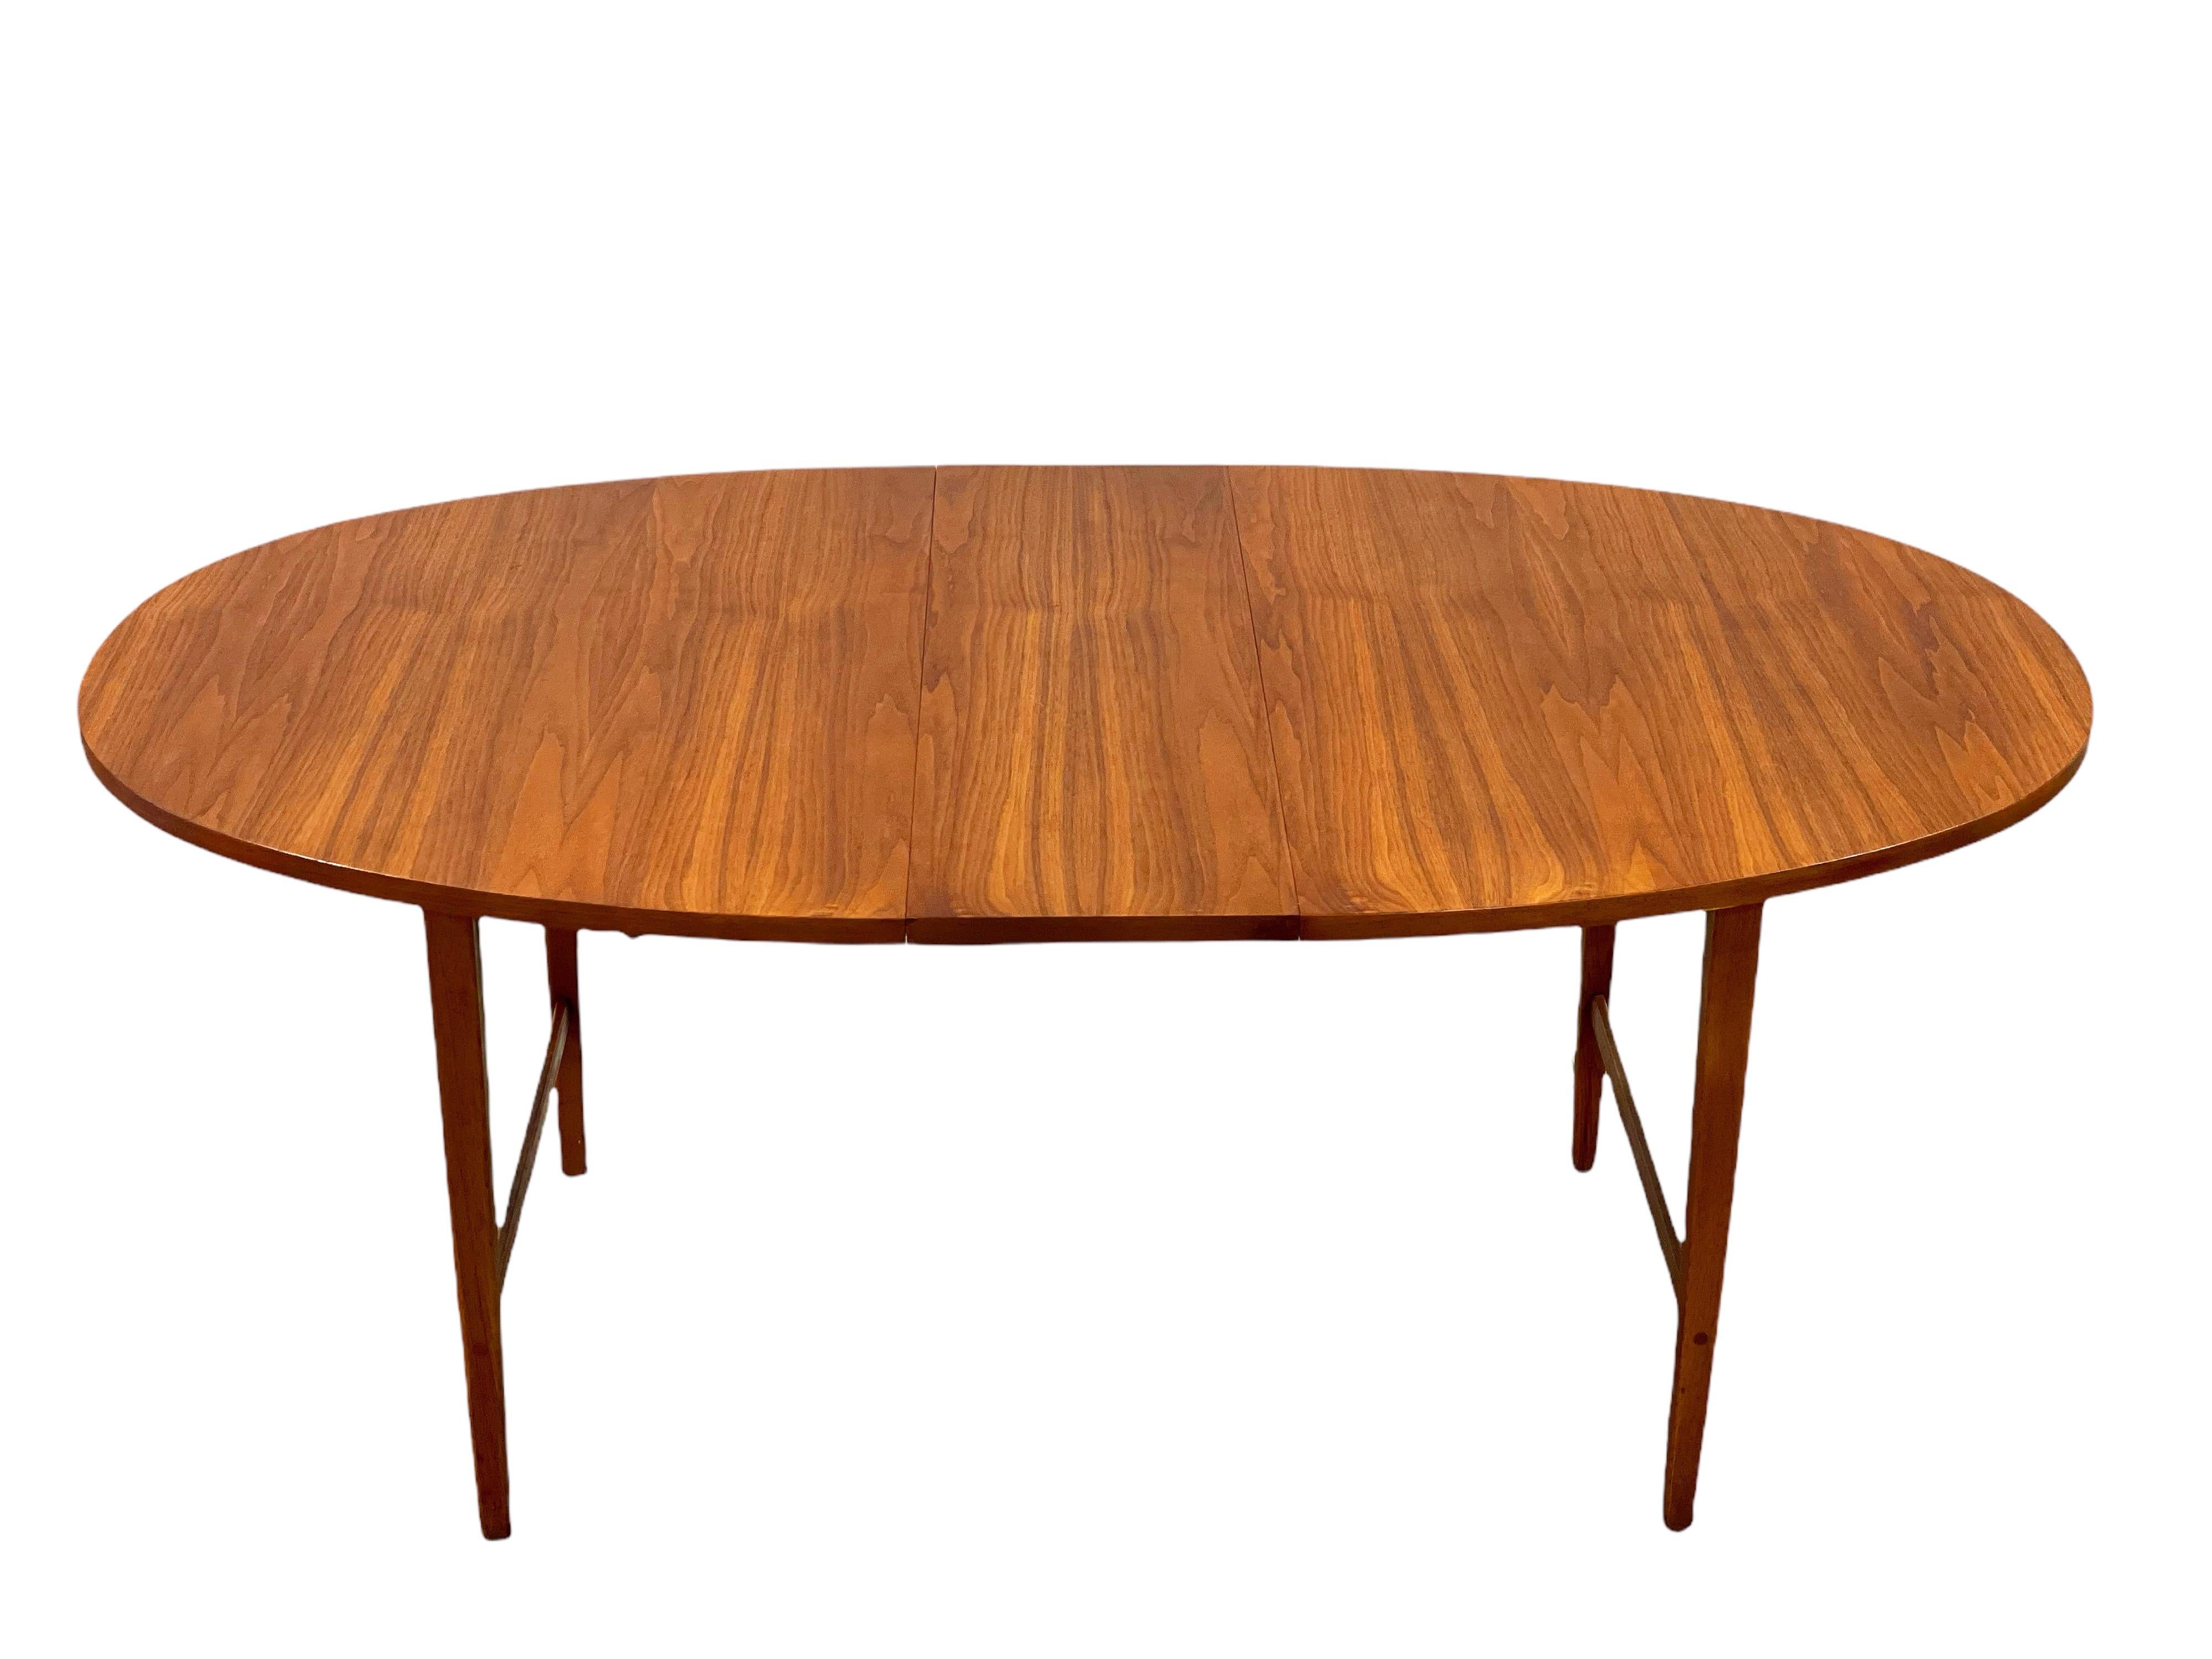 Midcentury Modern Paul McCobb Walnut Oval Dining Table, Components Line In Good Condition In Framingham, MA